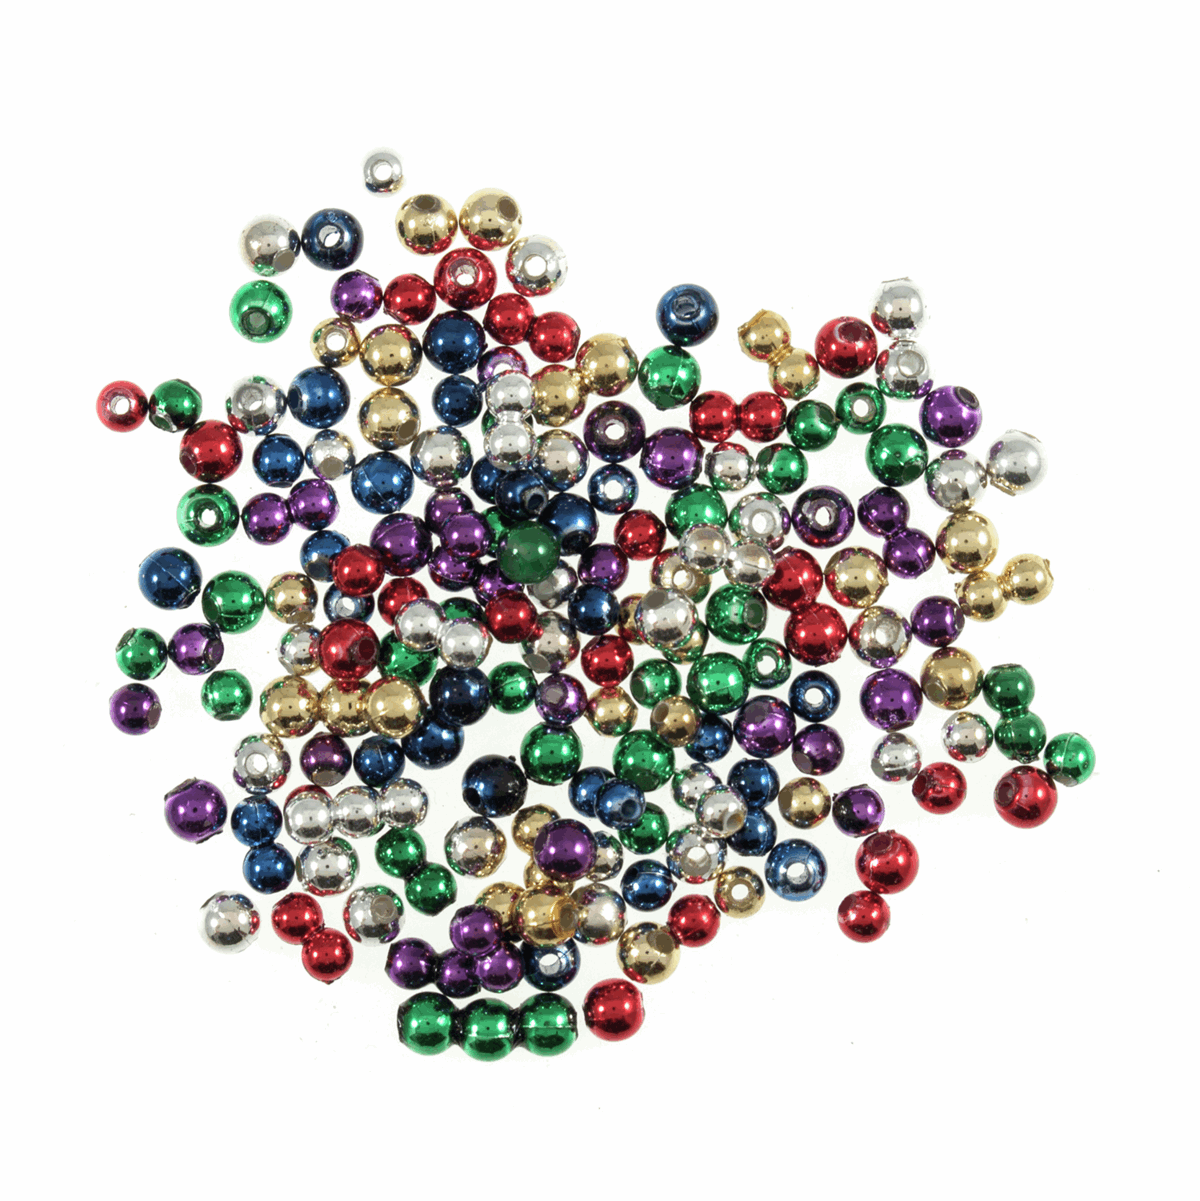 Trimits Assorted Coloured Plastic Beads - 30g